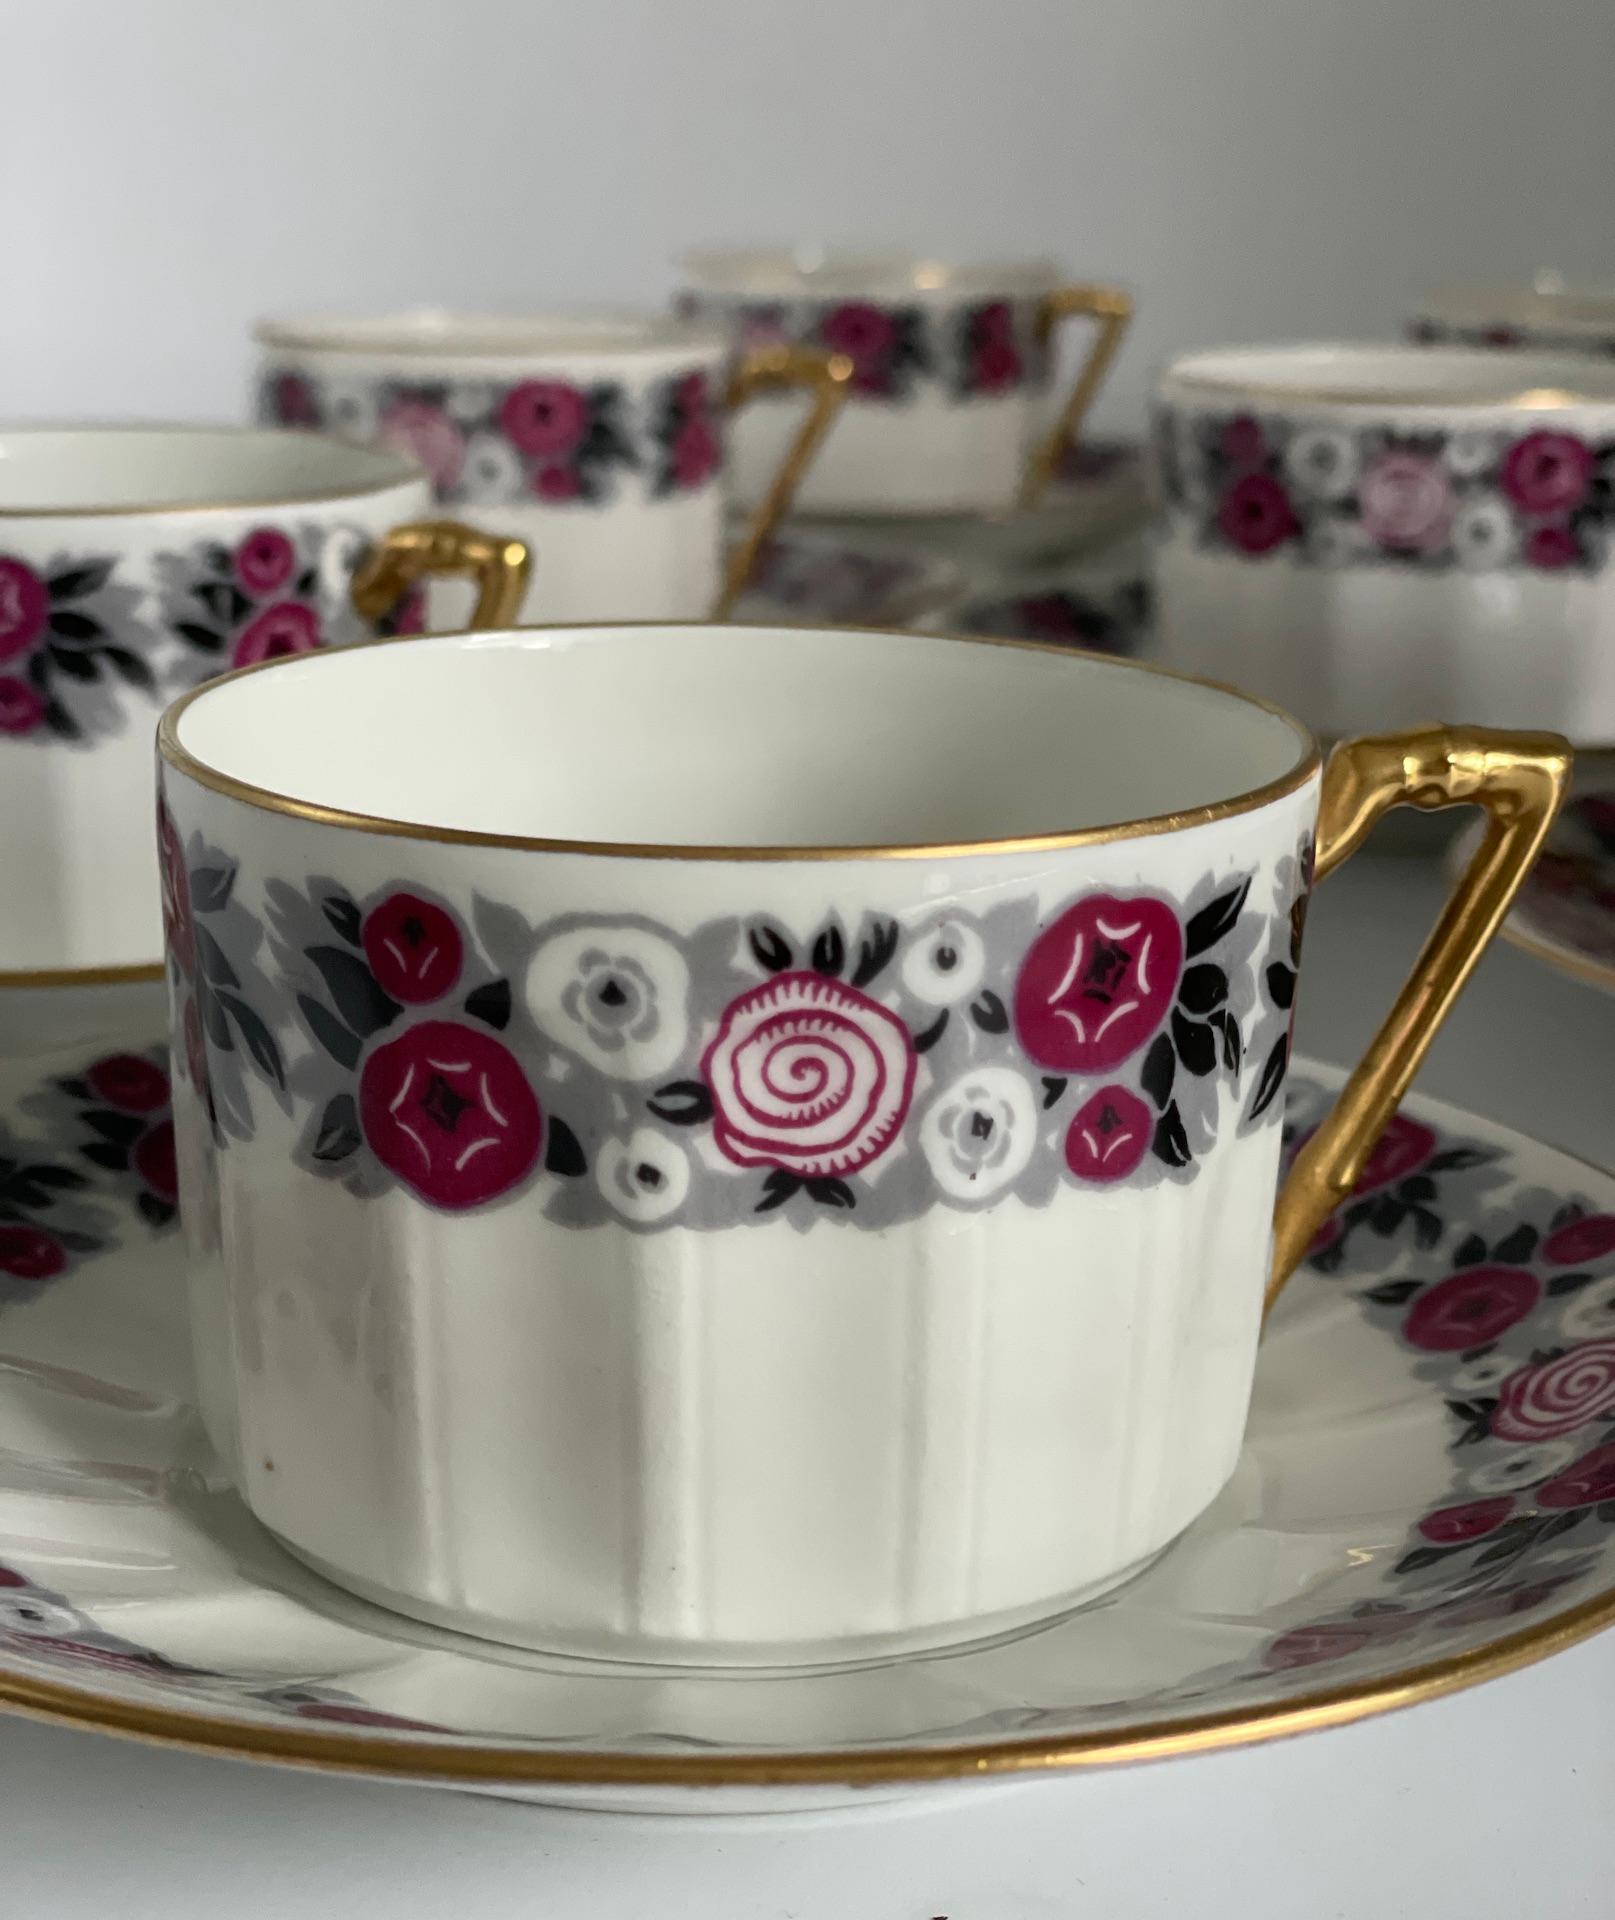 French Limoges porcelain tea or coffee service by Chabrol et Poirier, 1925 

These 6 cups are signed by the Manufacture of Limoges Chabrol et Poirier and bear the fabulous mention Grand Prix Exposition Internationale des Arts décoratifs Paris